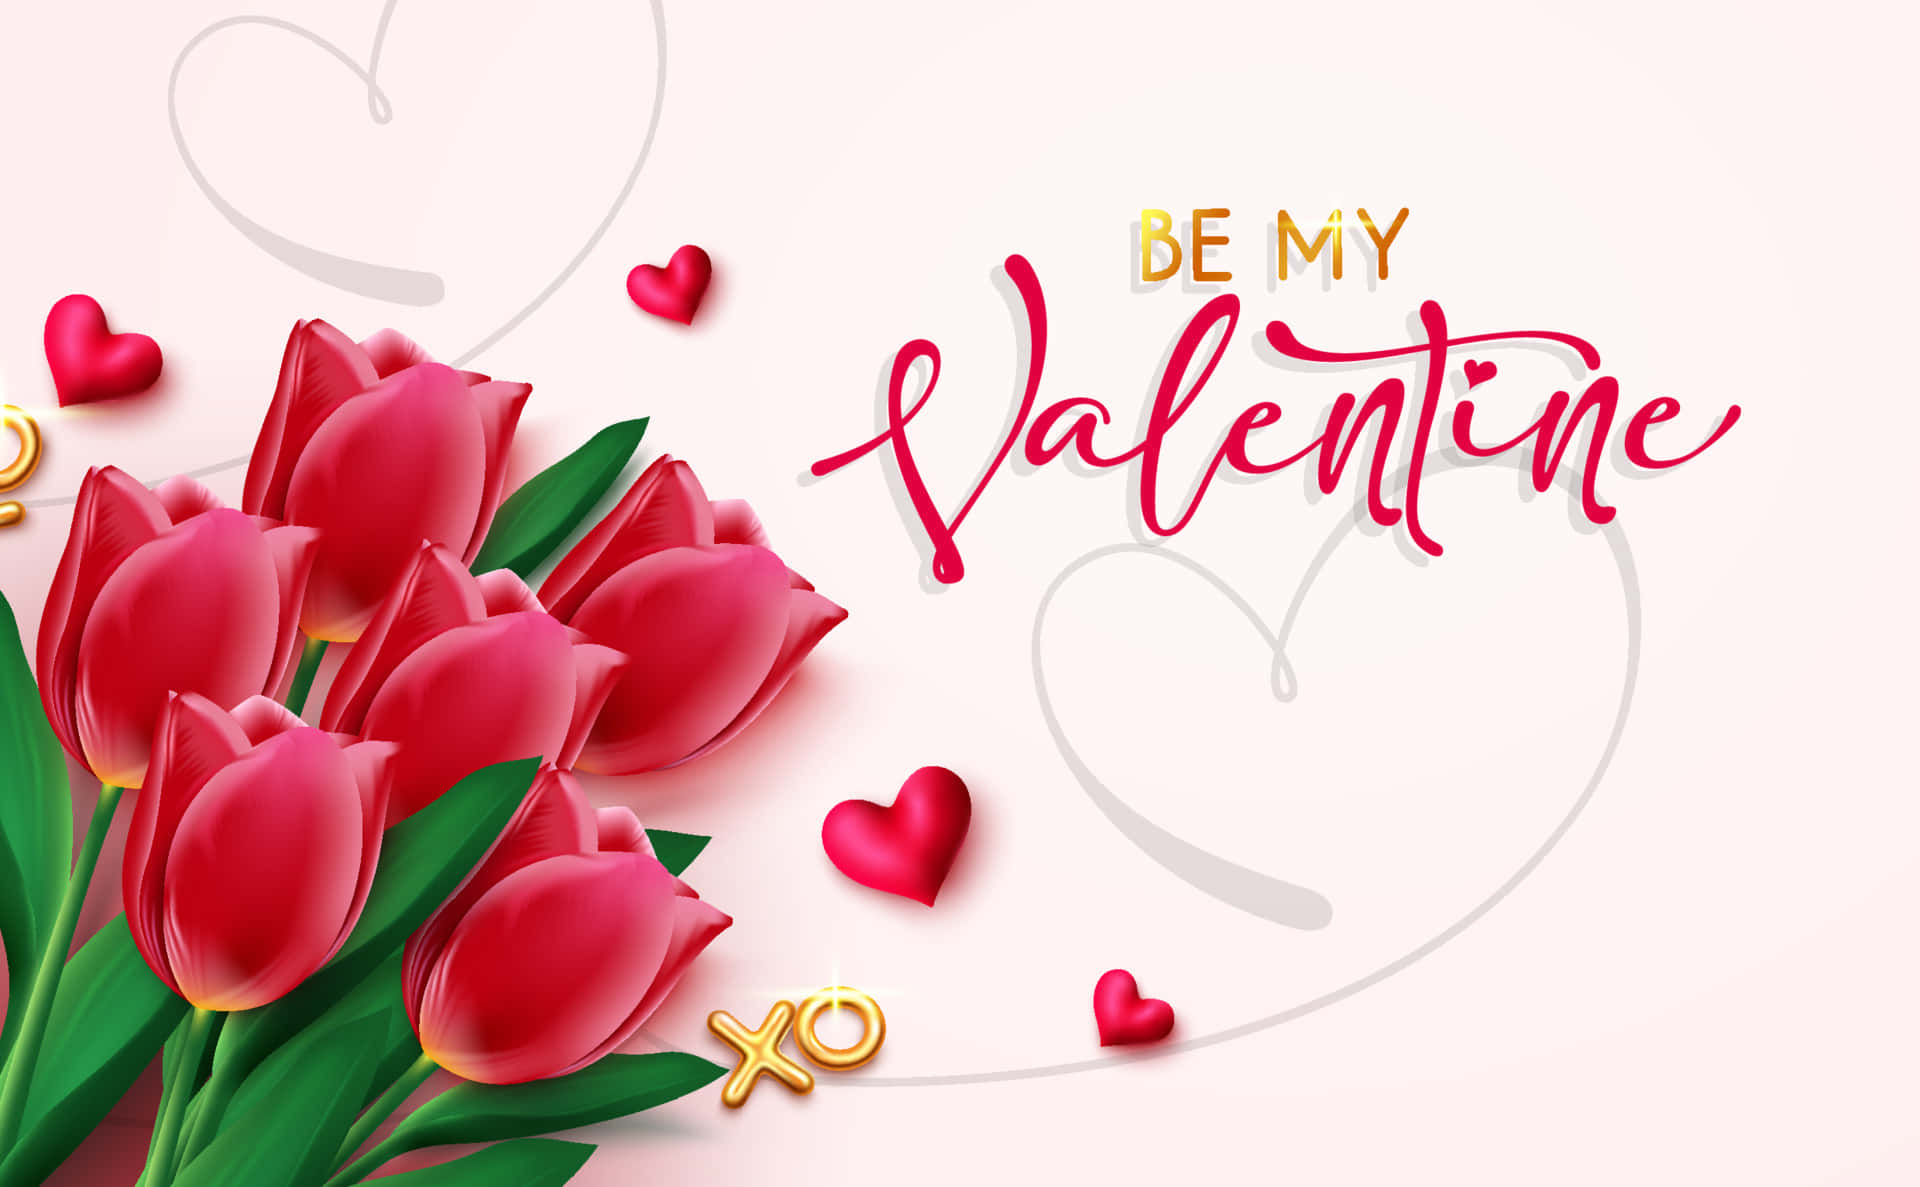 Valentine's Day Greetings With Red Tulips And Hearts Wallpaper